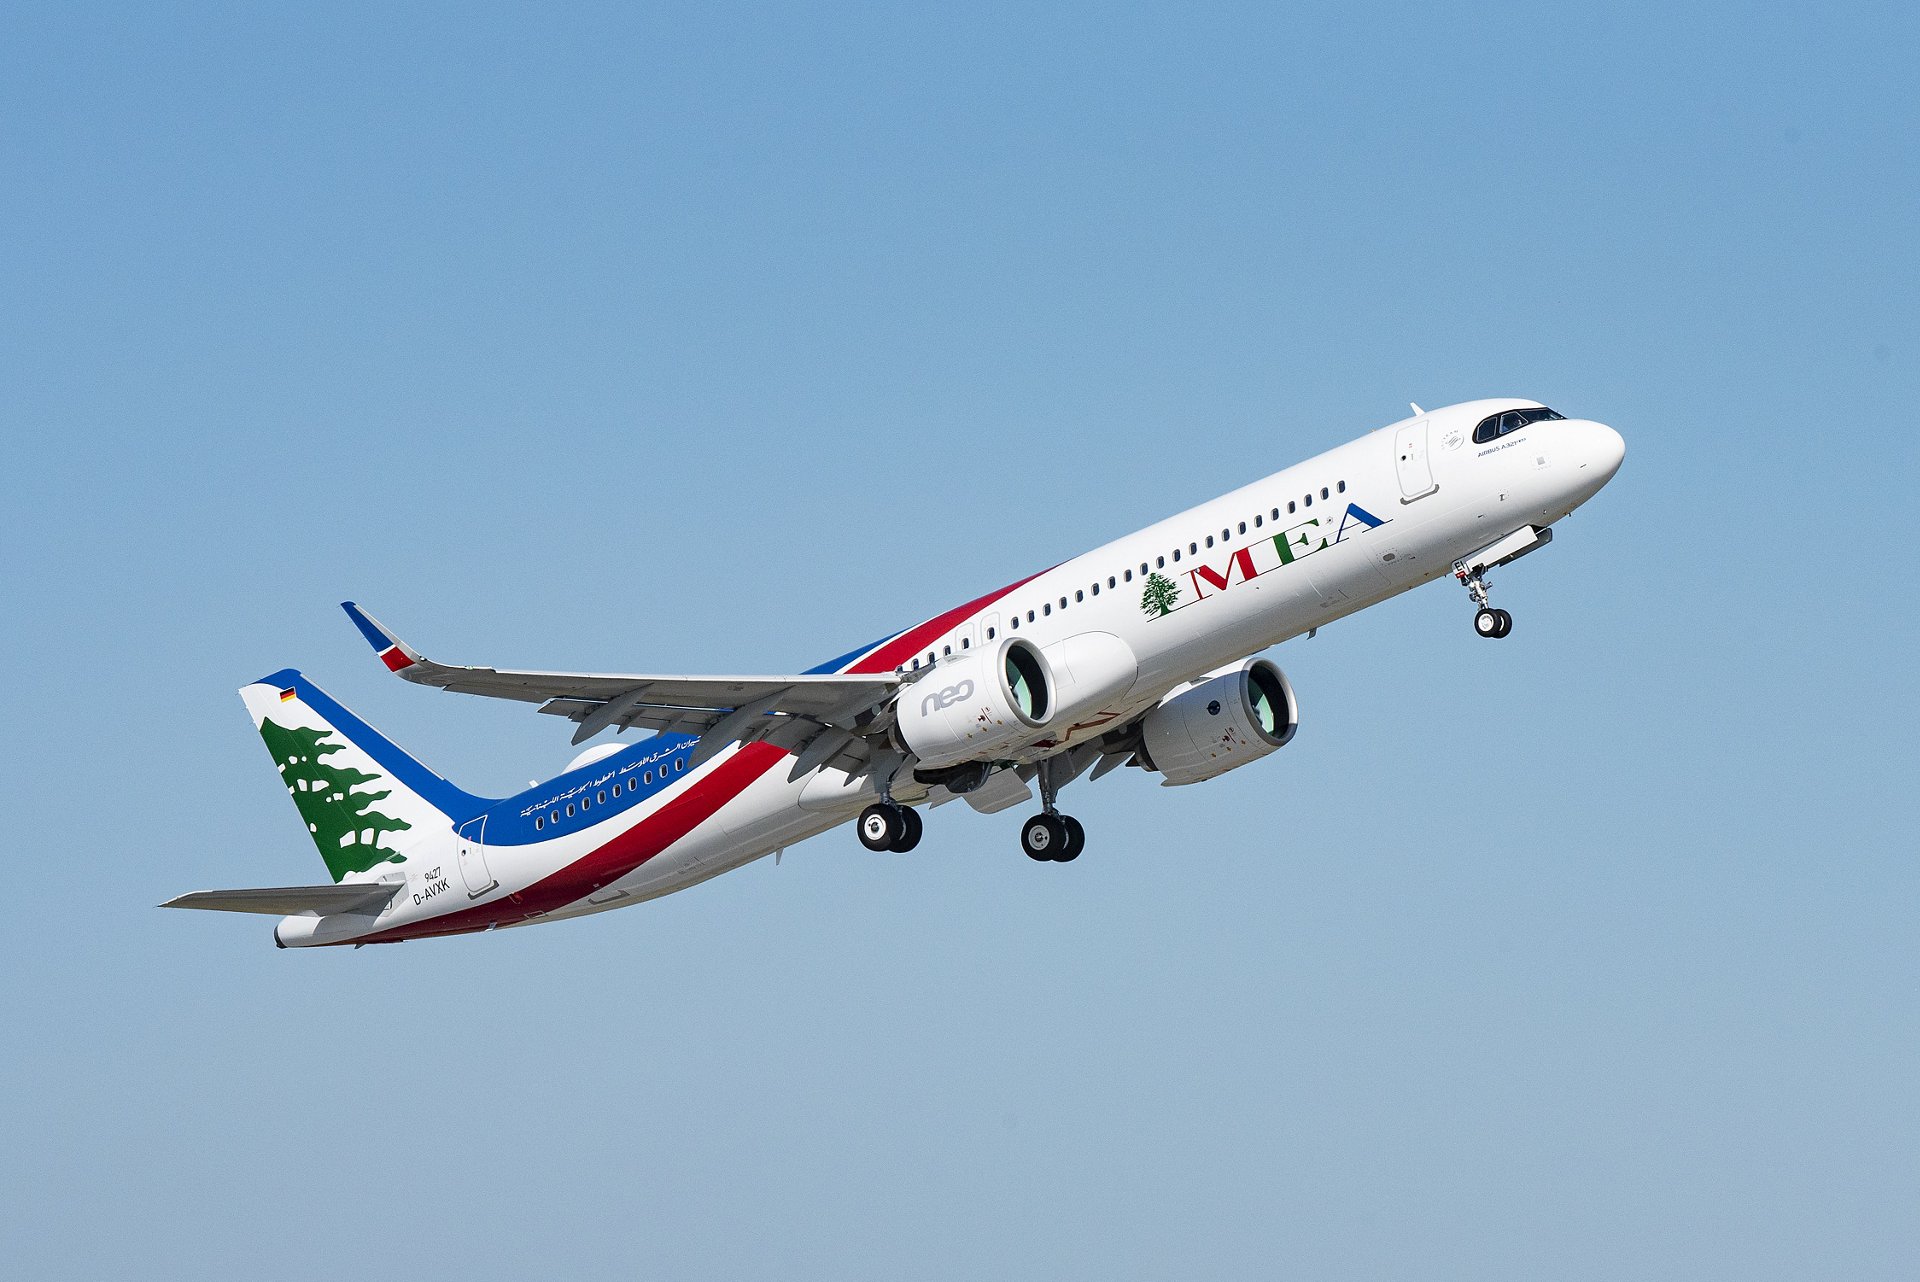 Lebanon-based Middle East Airlines (MEA) has received its first A321neo aircraft from Airbus’ final assembly line in Hamburg, Germany.